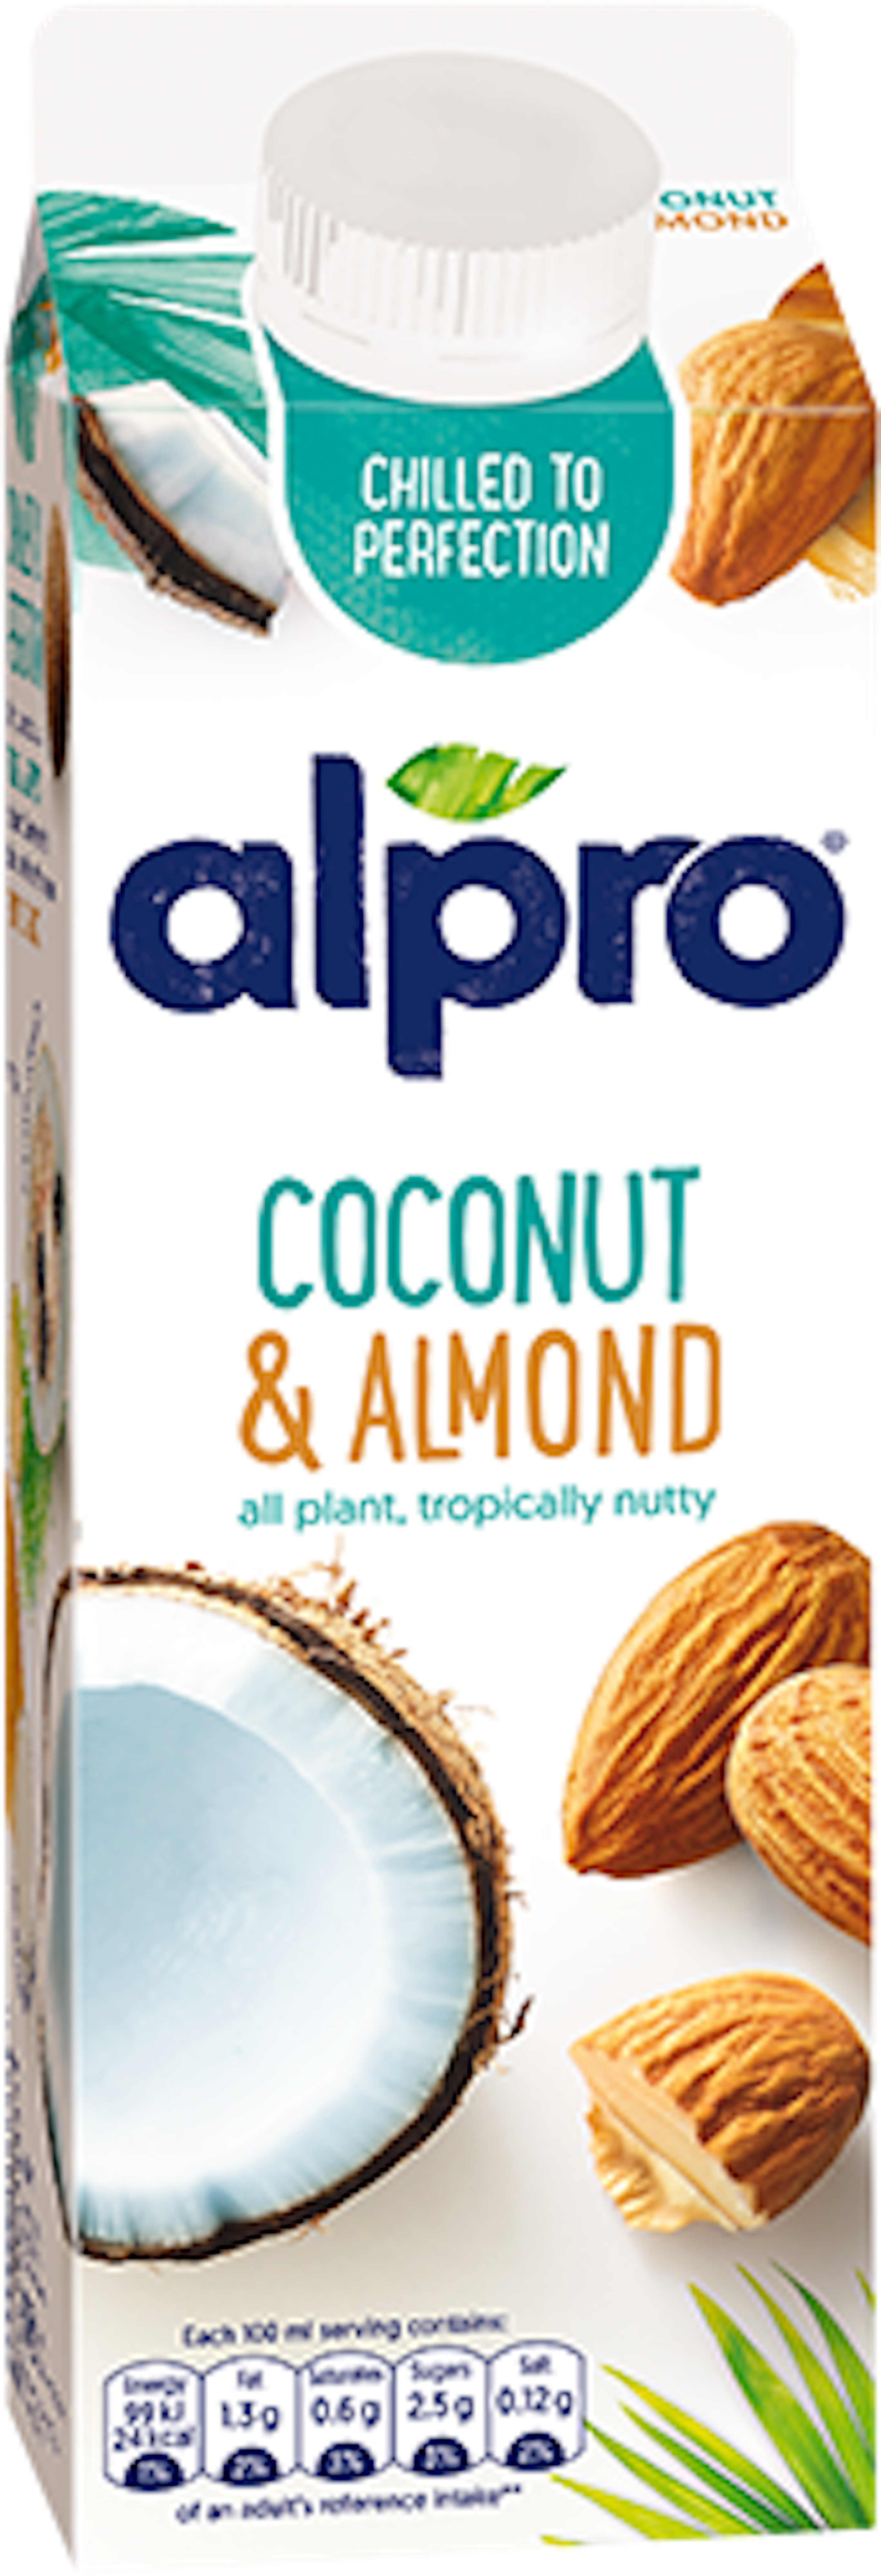 2.0 DRINK - Coconut Almond Chilled